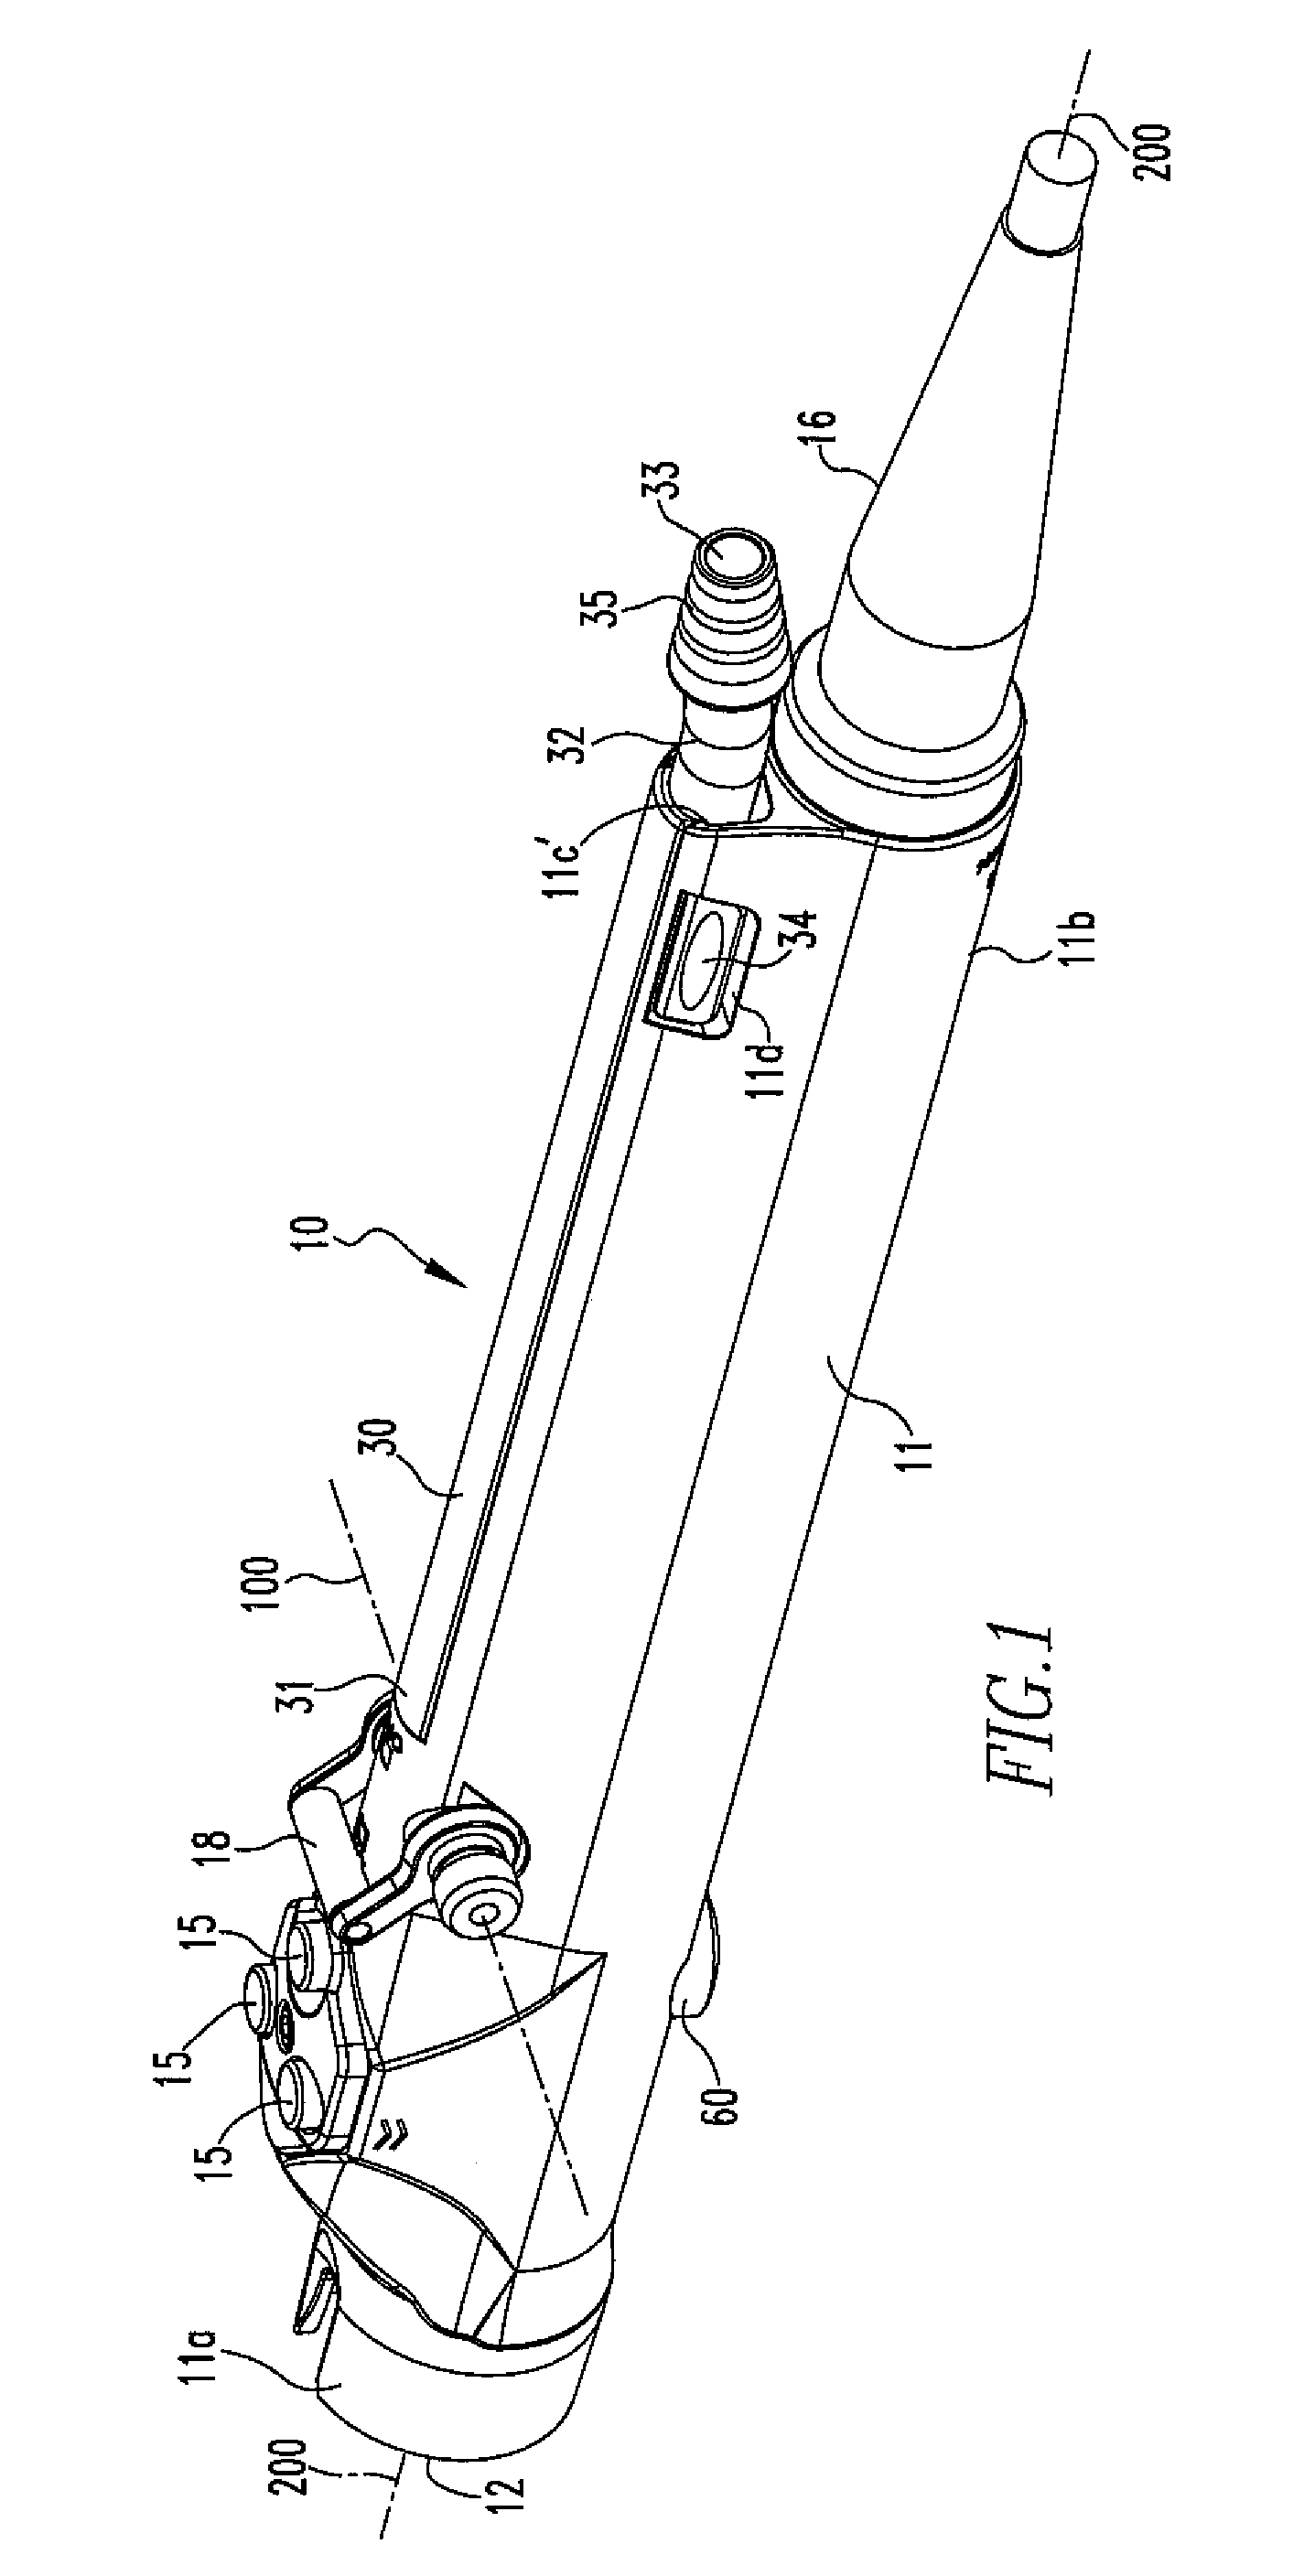 Surgical handpiece for endoscopic resection